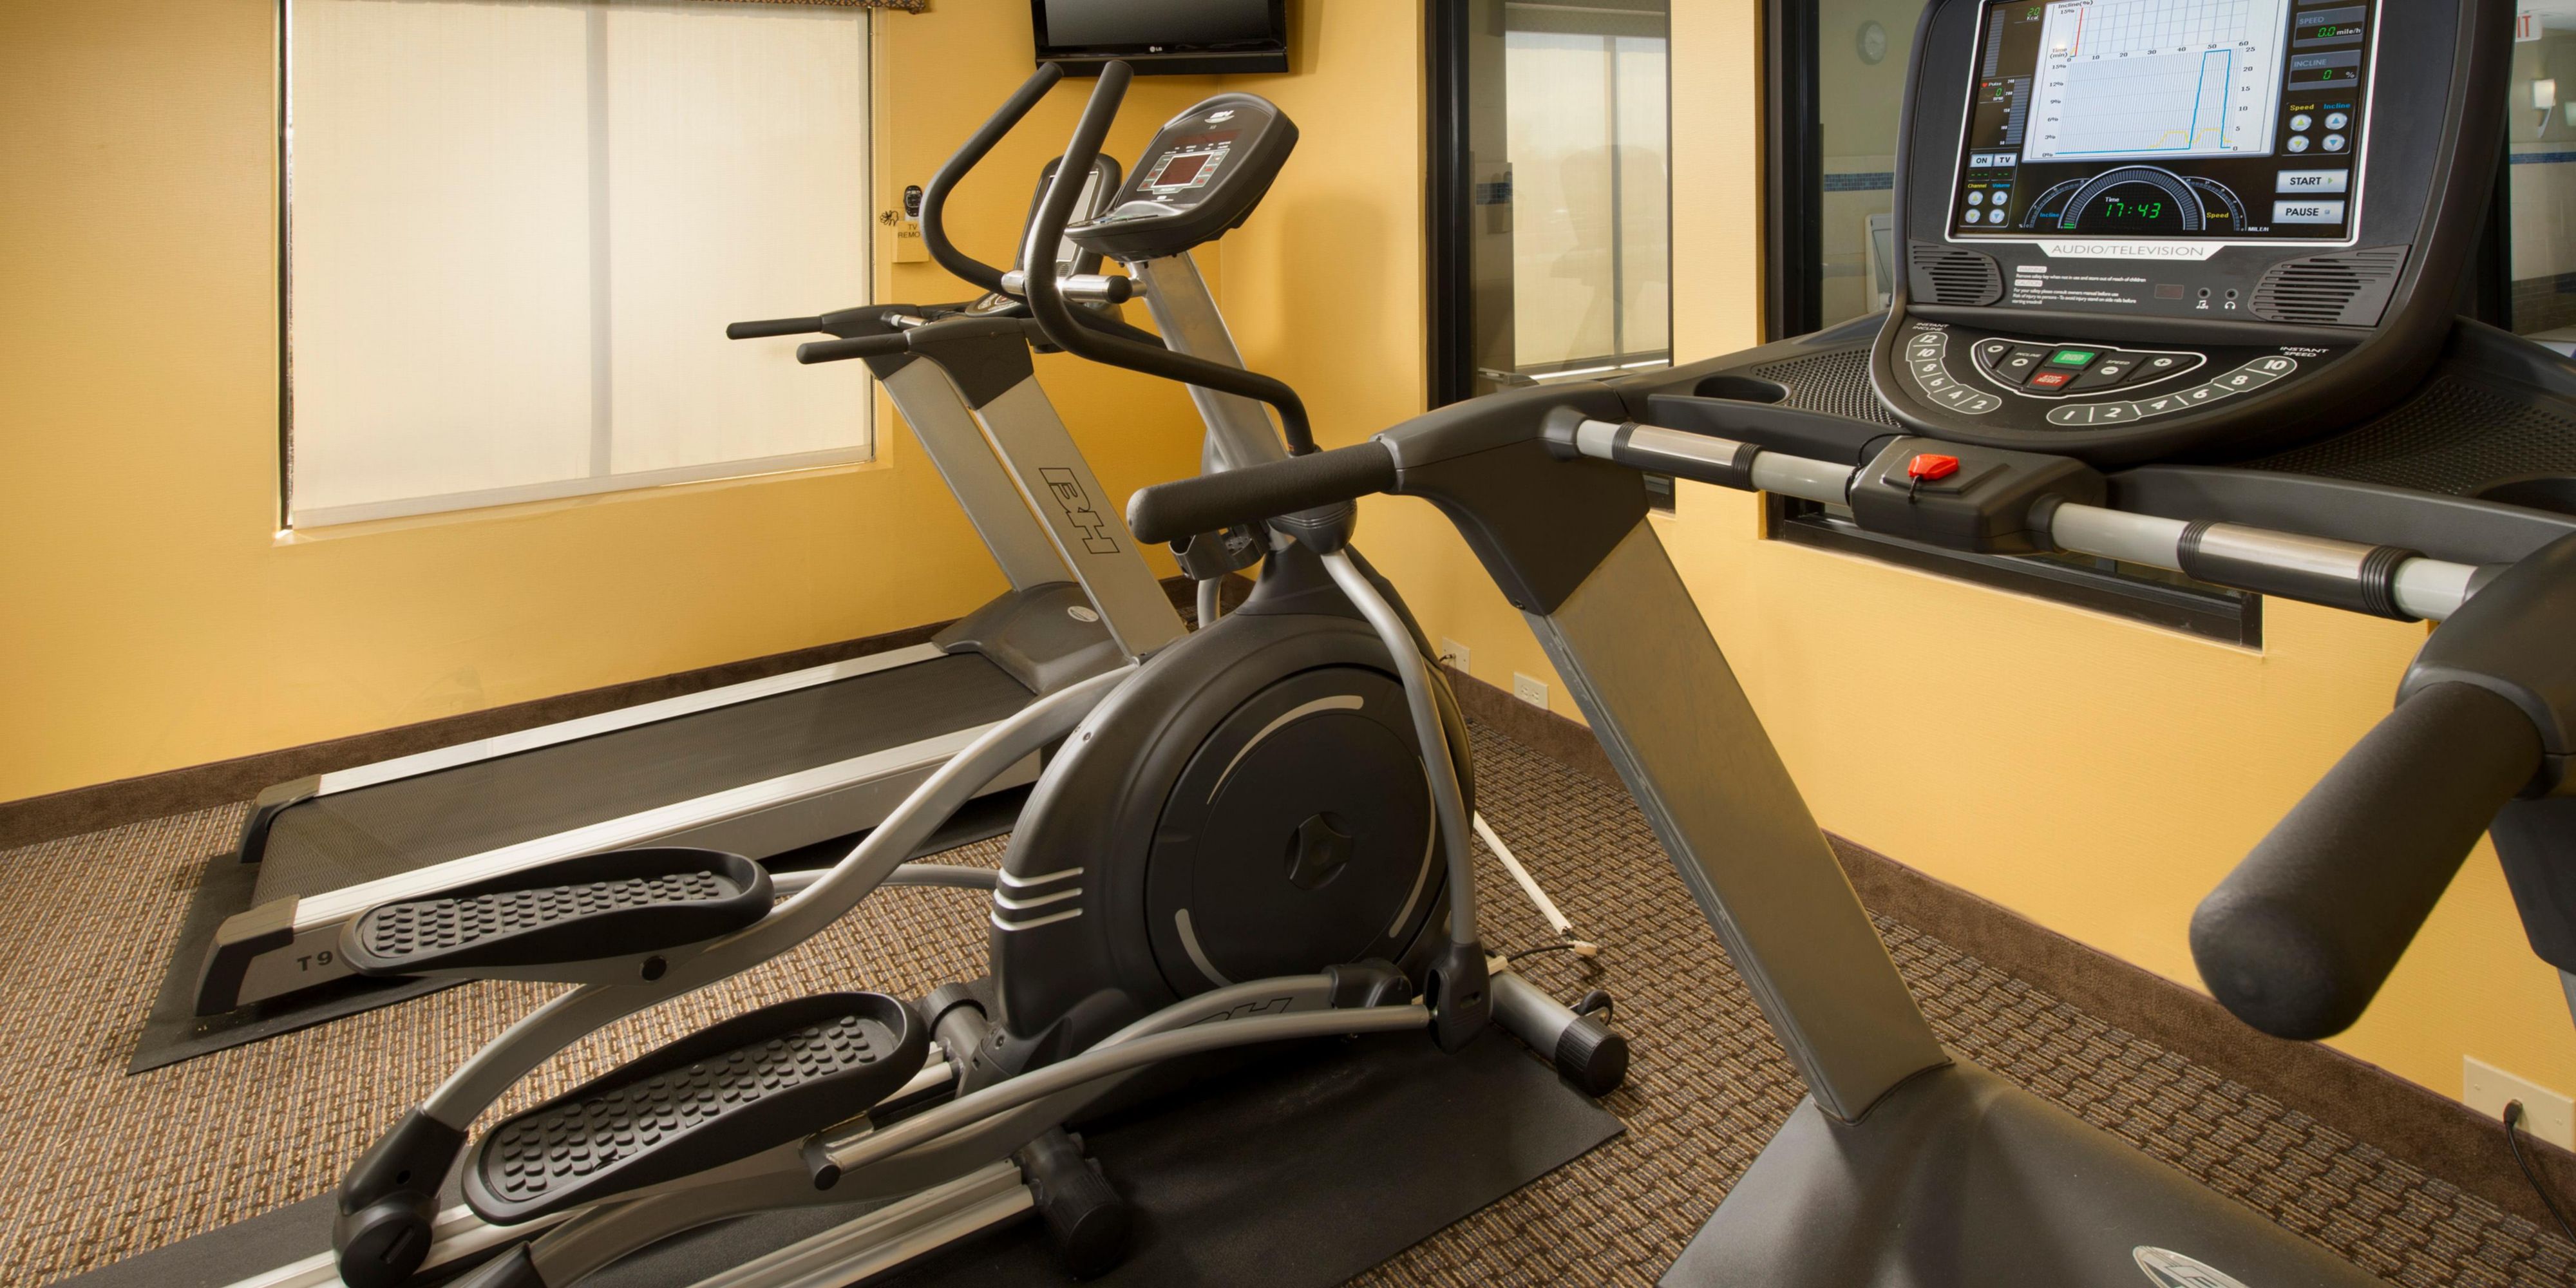 Our fitness center is equipped with an elliptical and a treadmill, both with personal TV's, and a multi-function weight machine, all overlooking our swimming pool area.